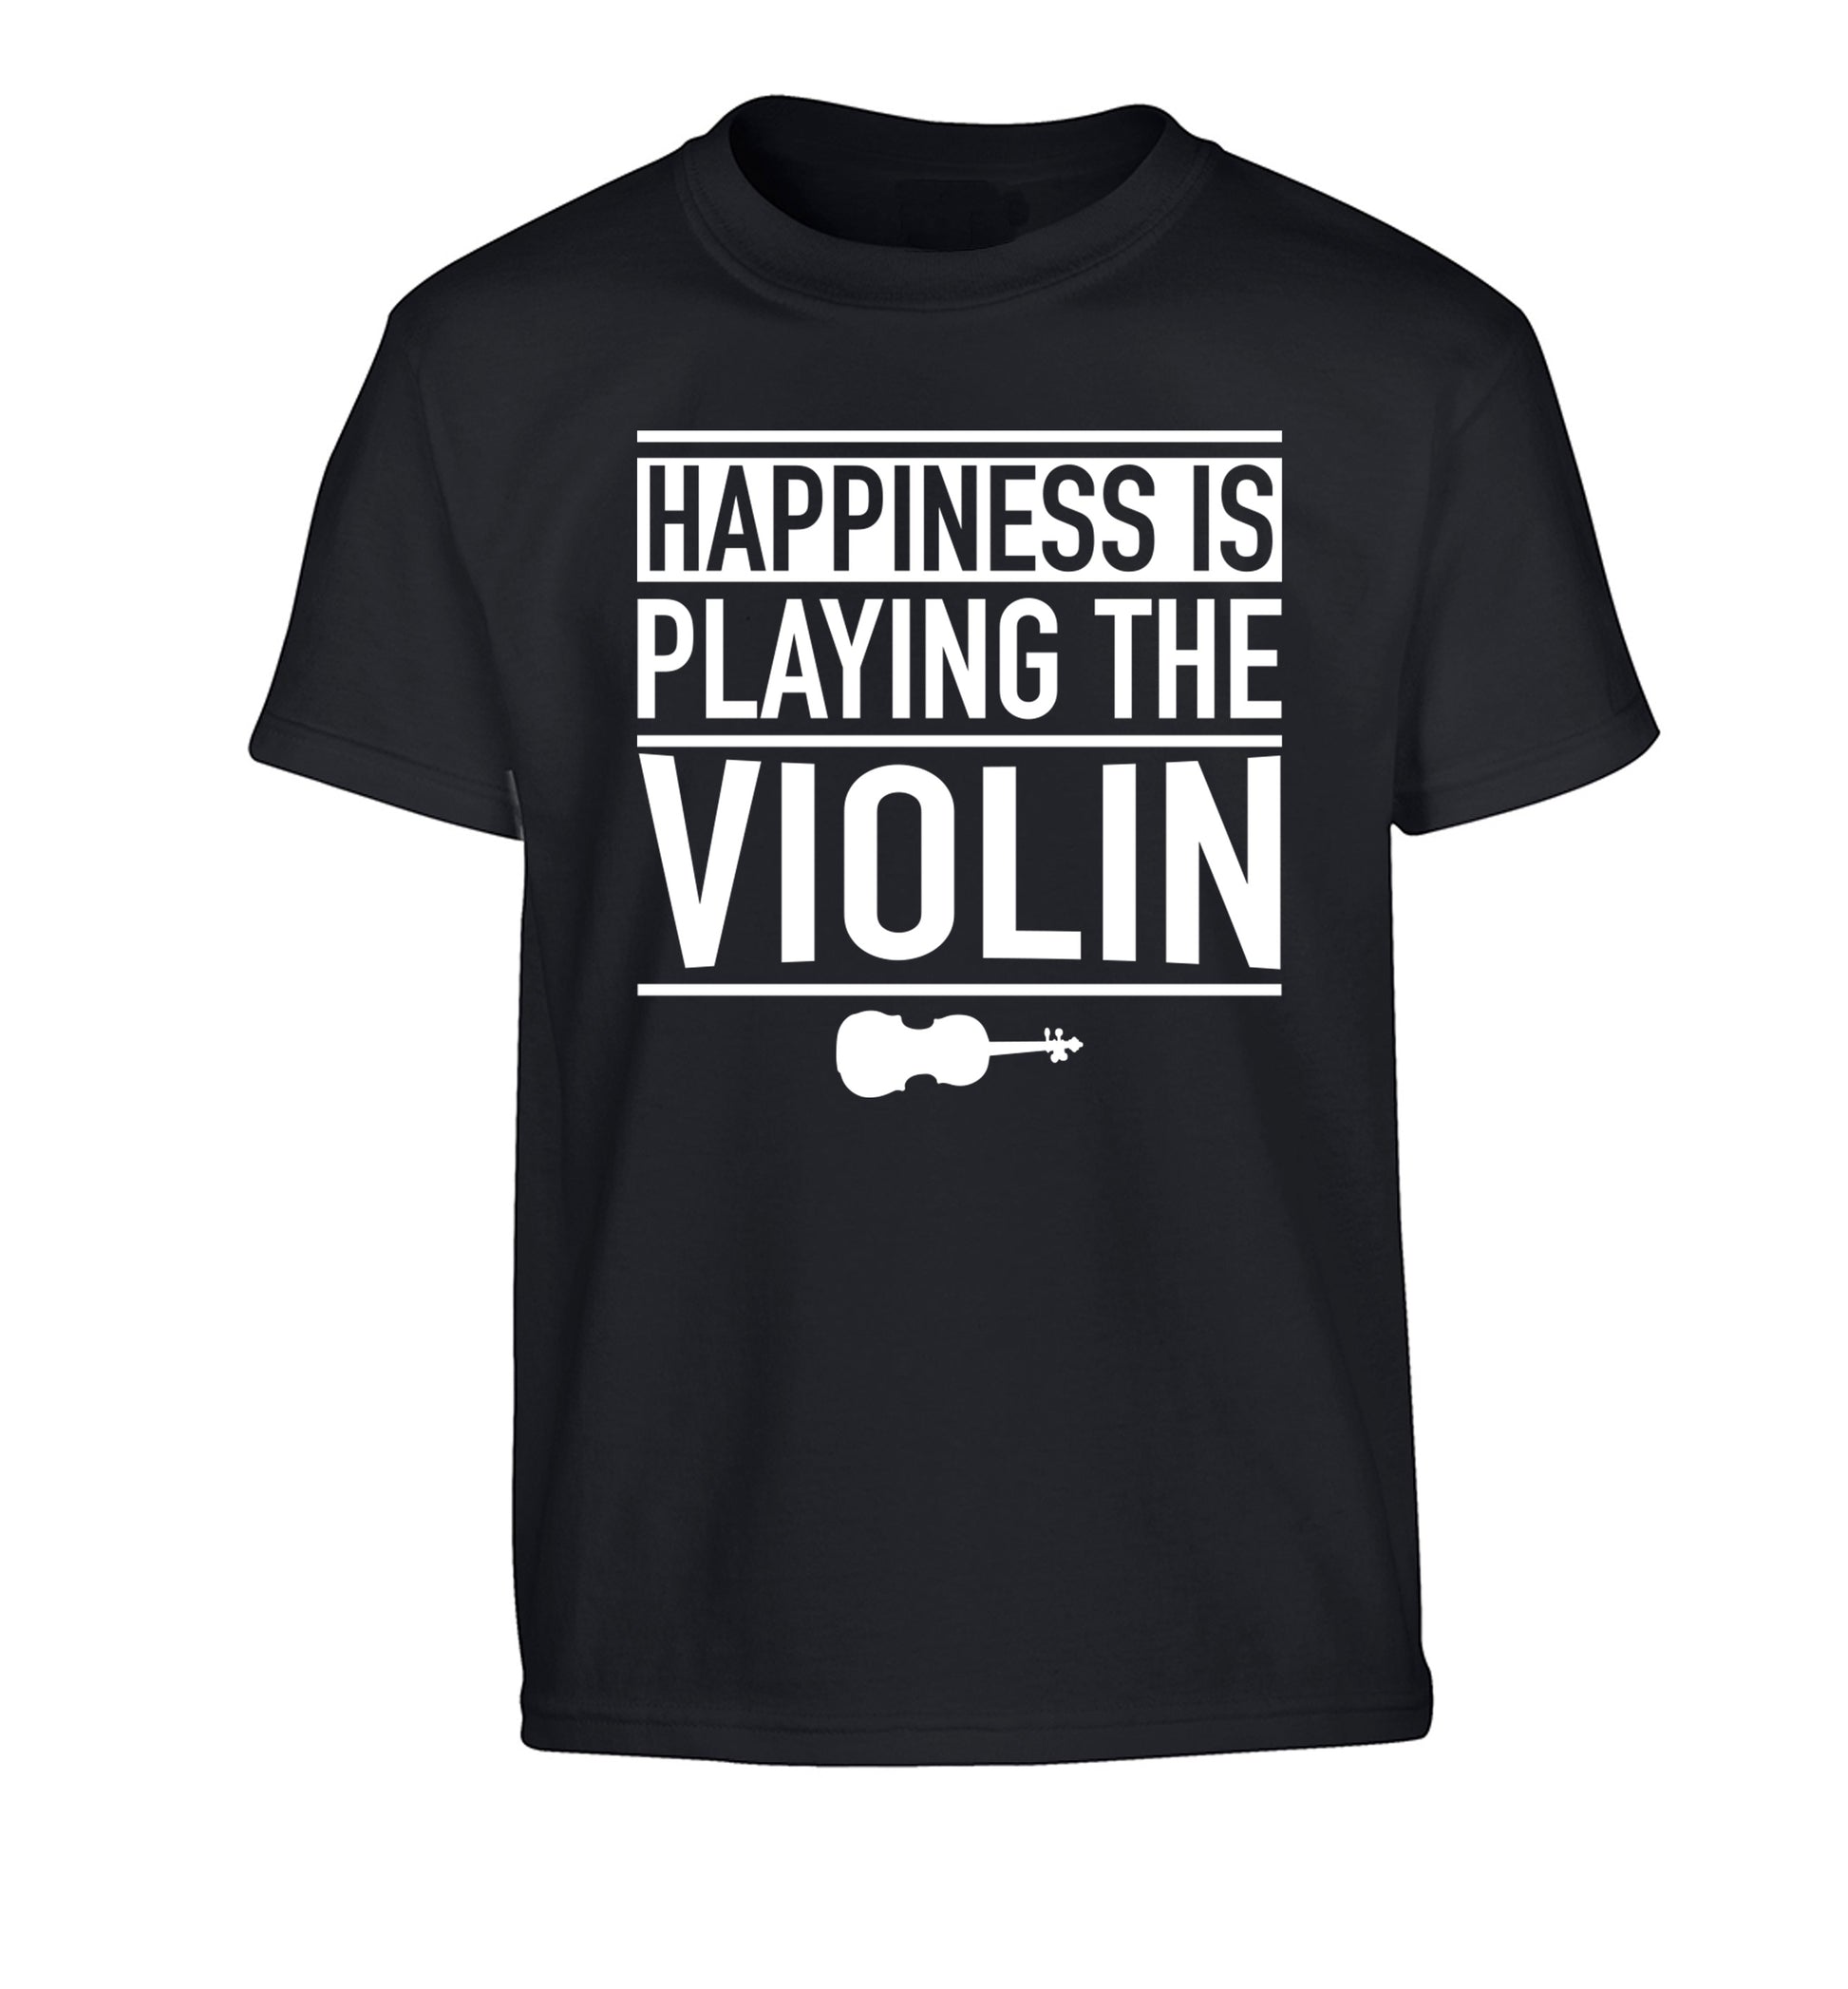 Happiness is playing the violin Children's black Tshirt 12-13 Years